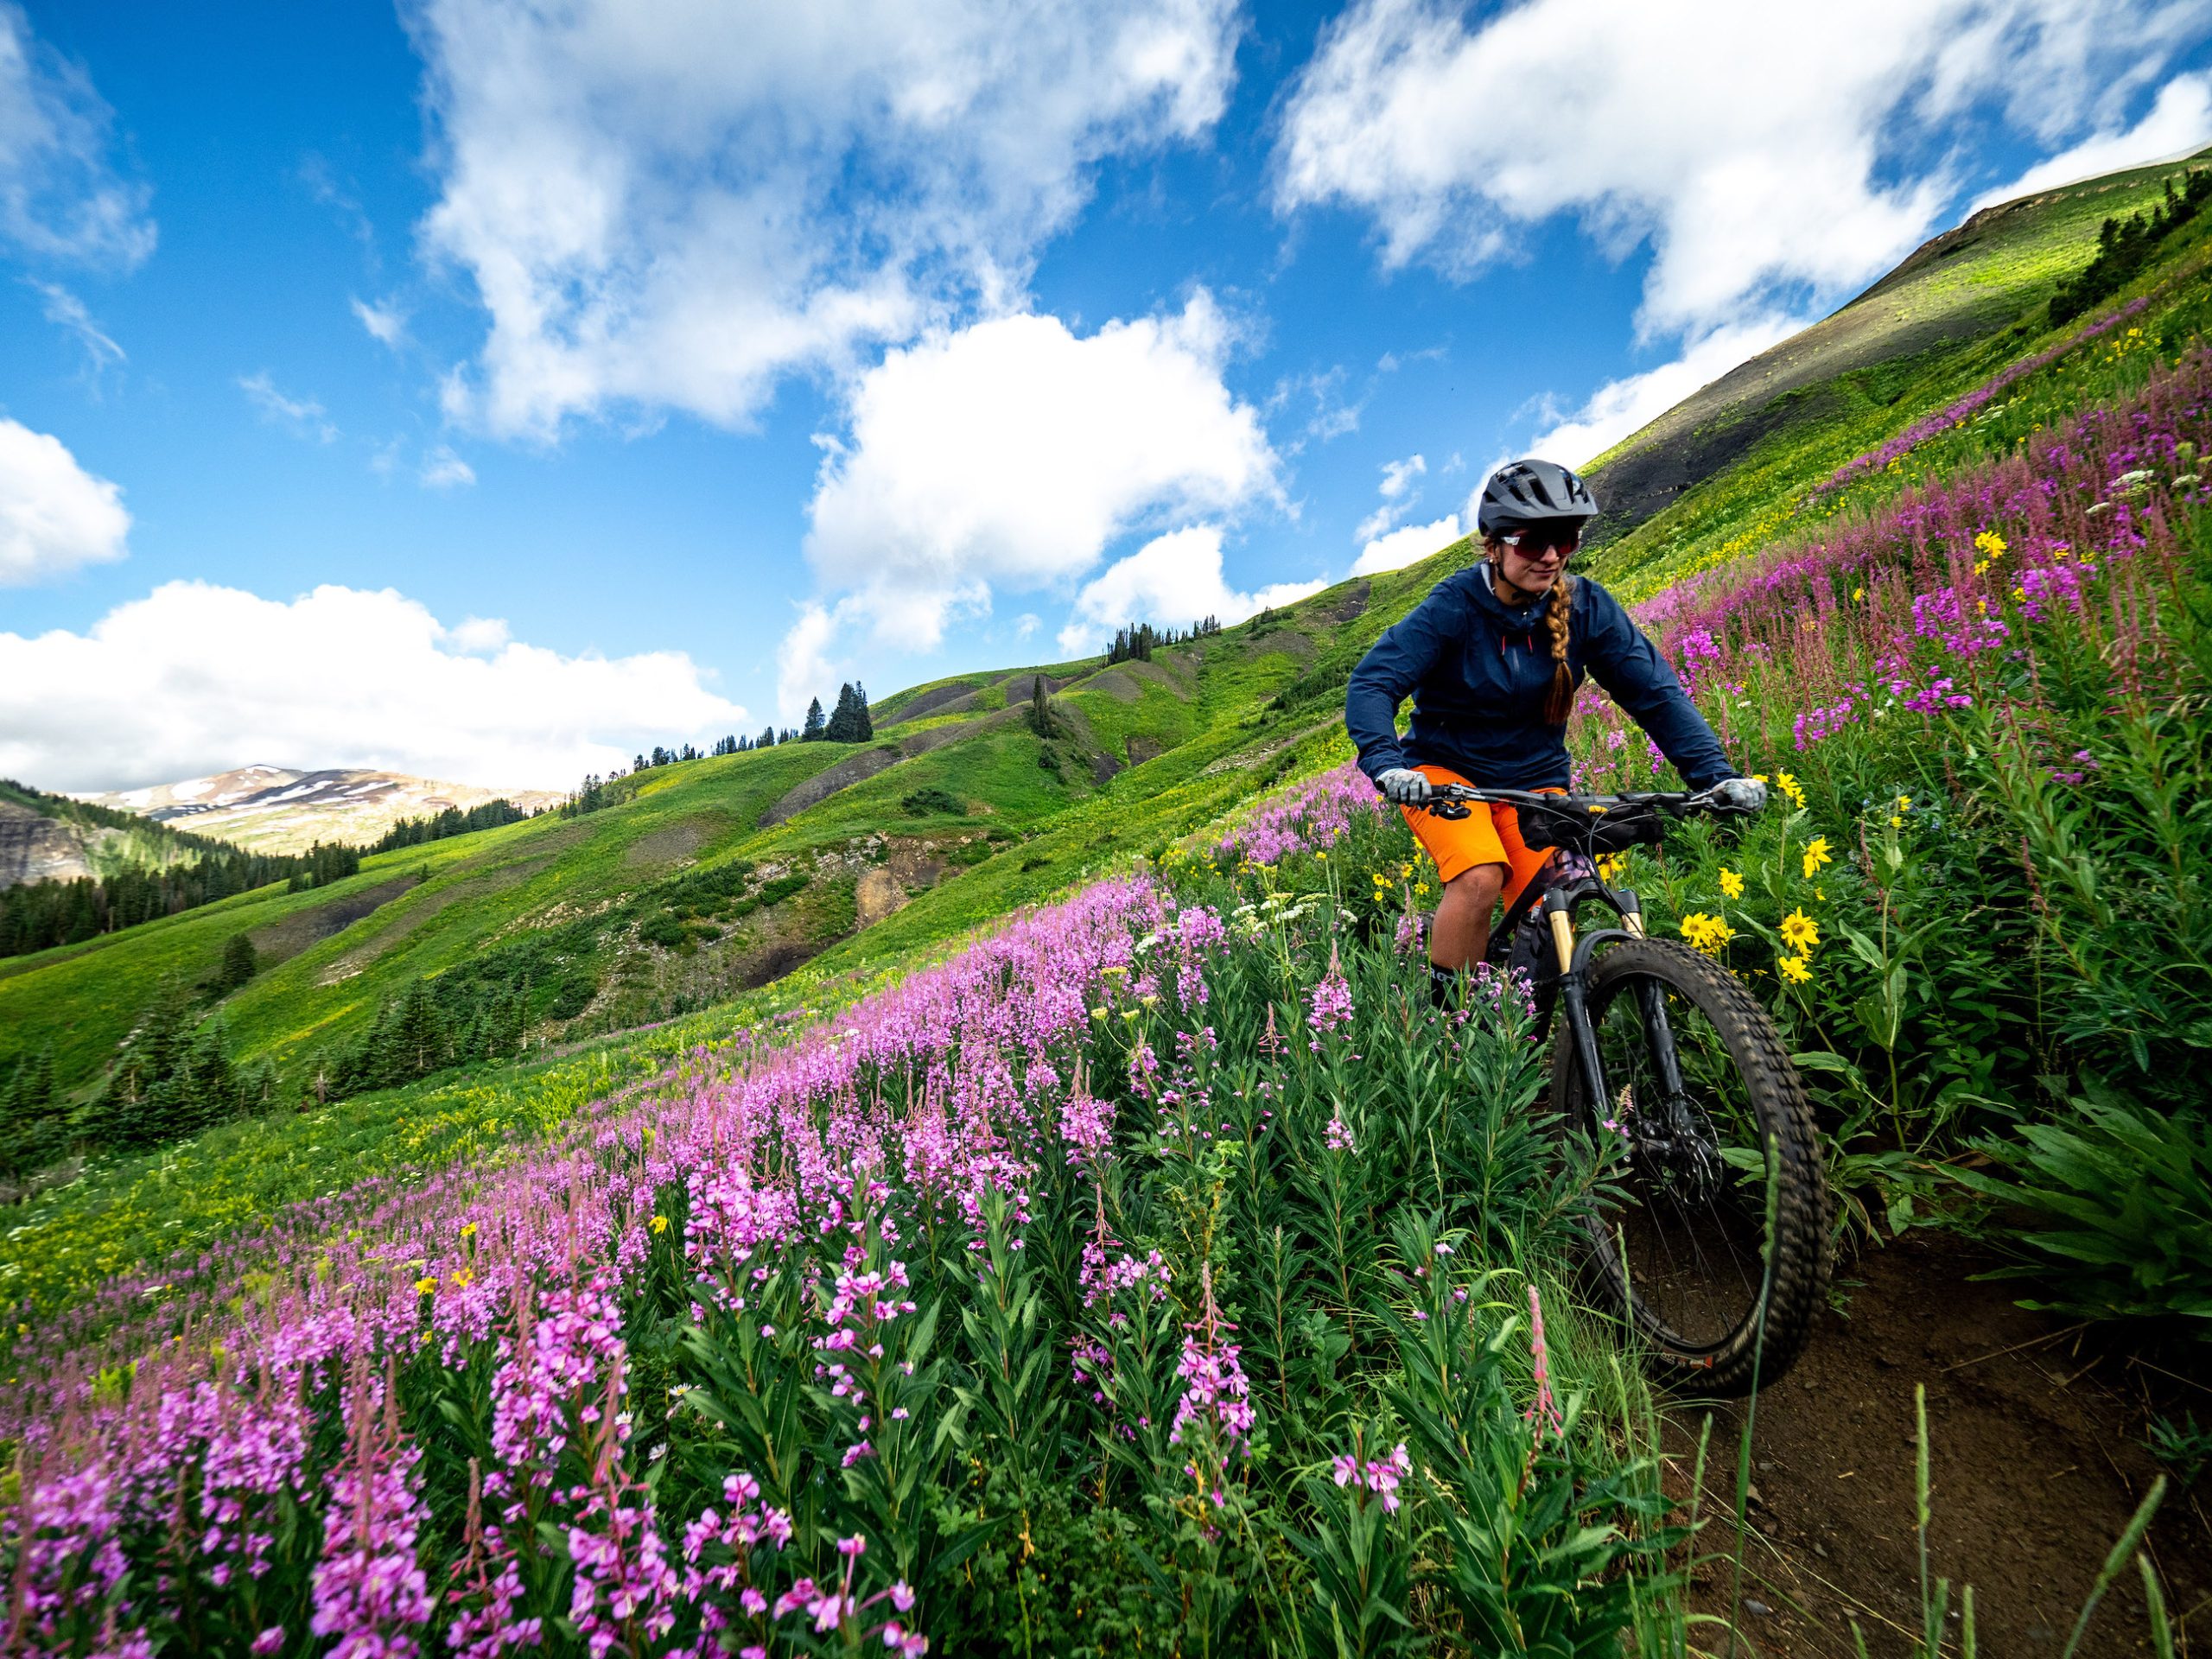 A person riding a mountain bike through a field of wildflowers